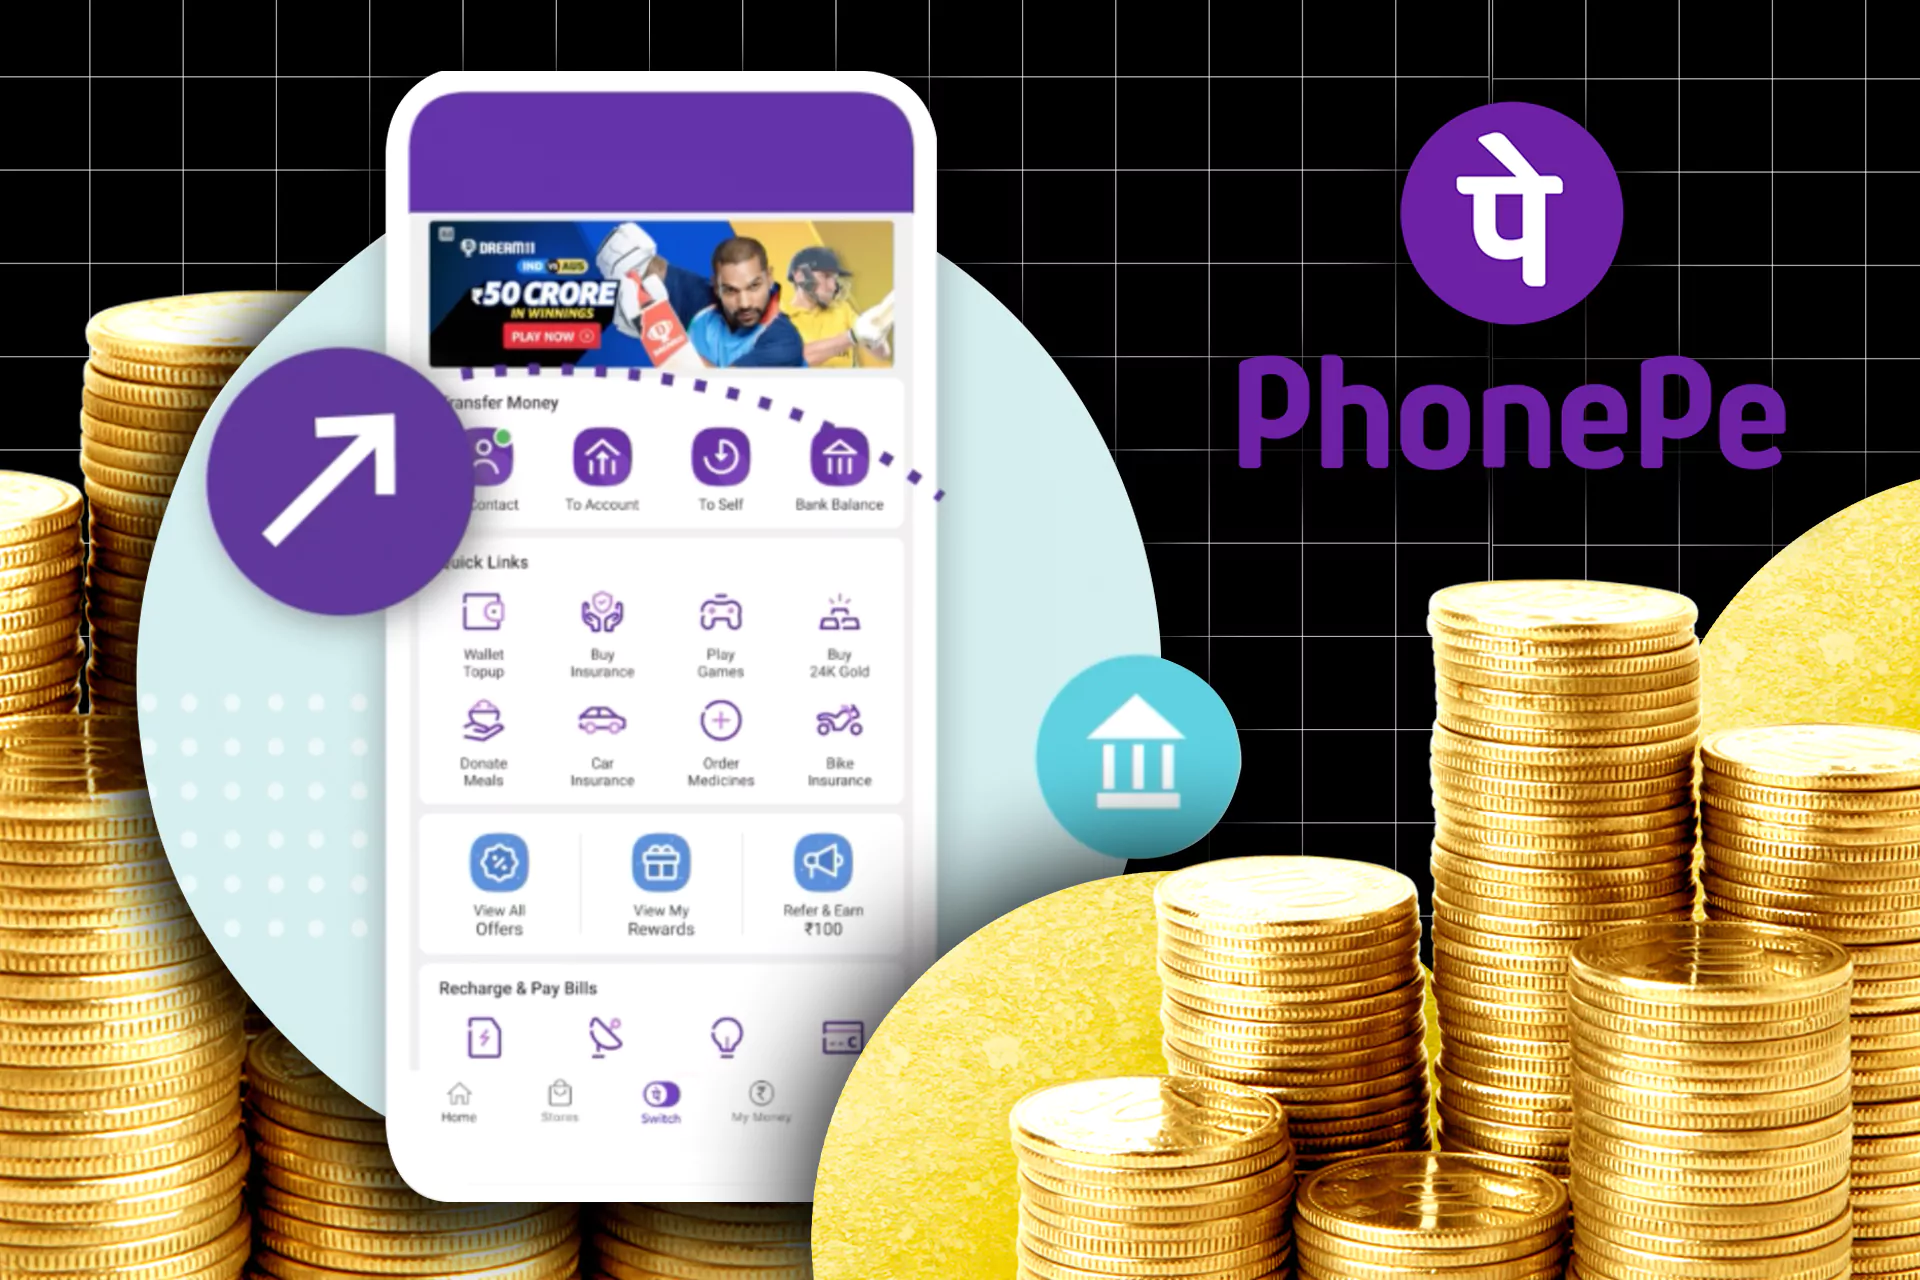 Online betting distributors often offer PhonePe as they have no commission, simple and fast transactions, and support local currency - Indian rupees.